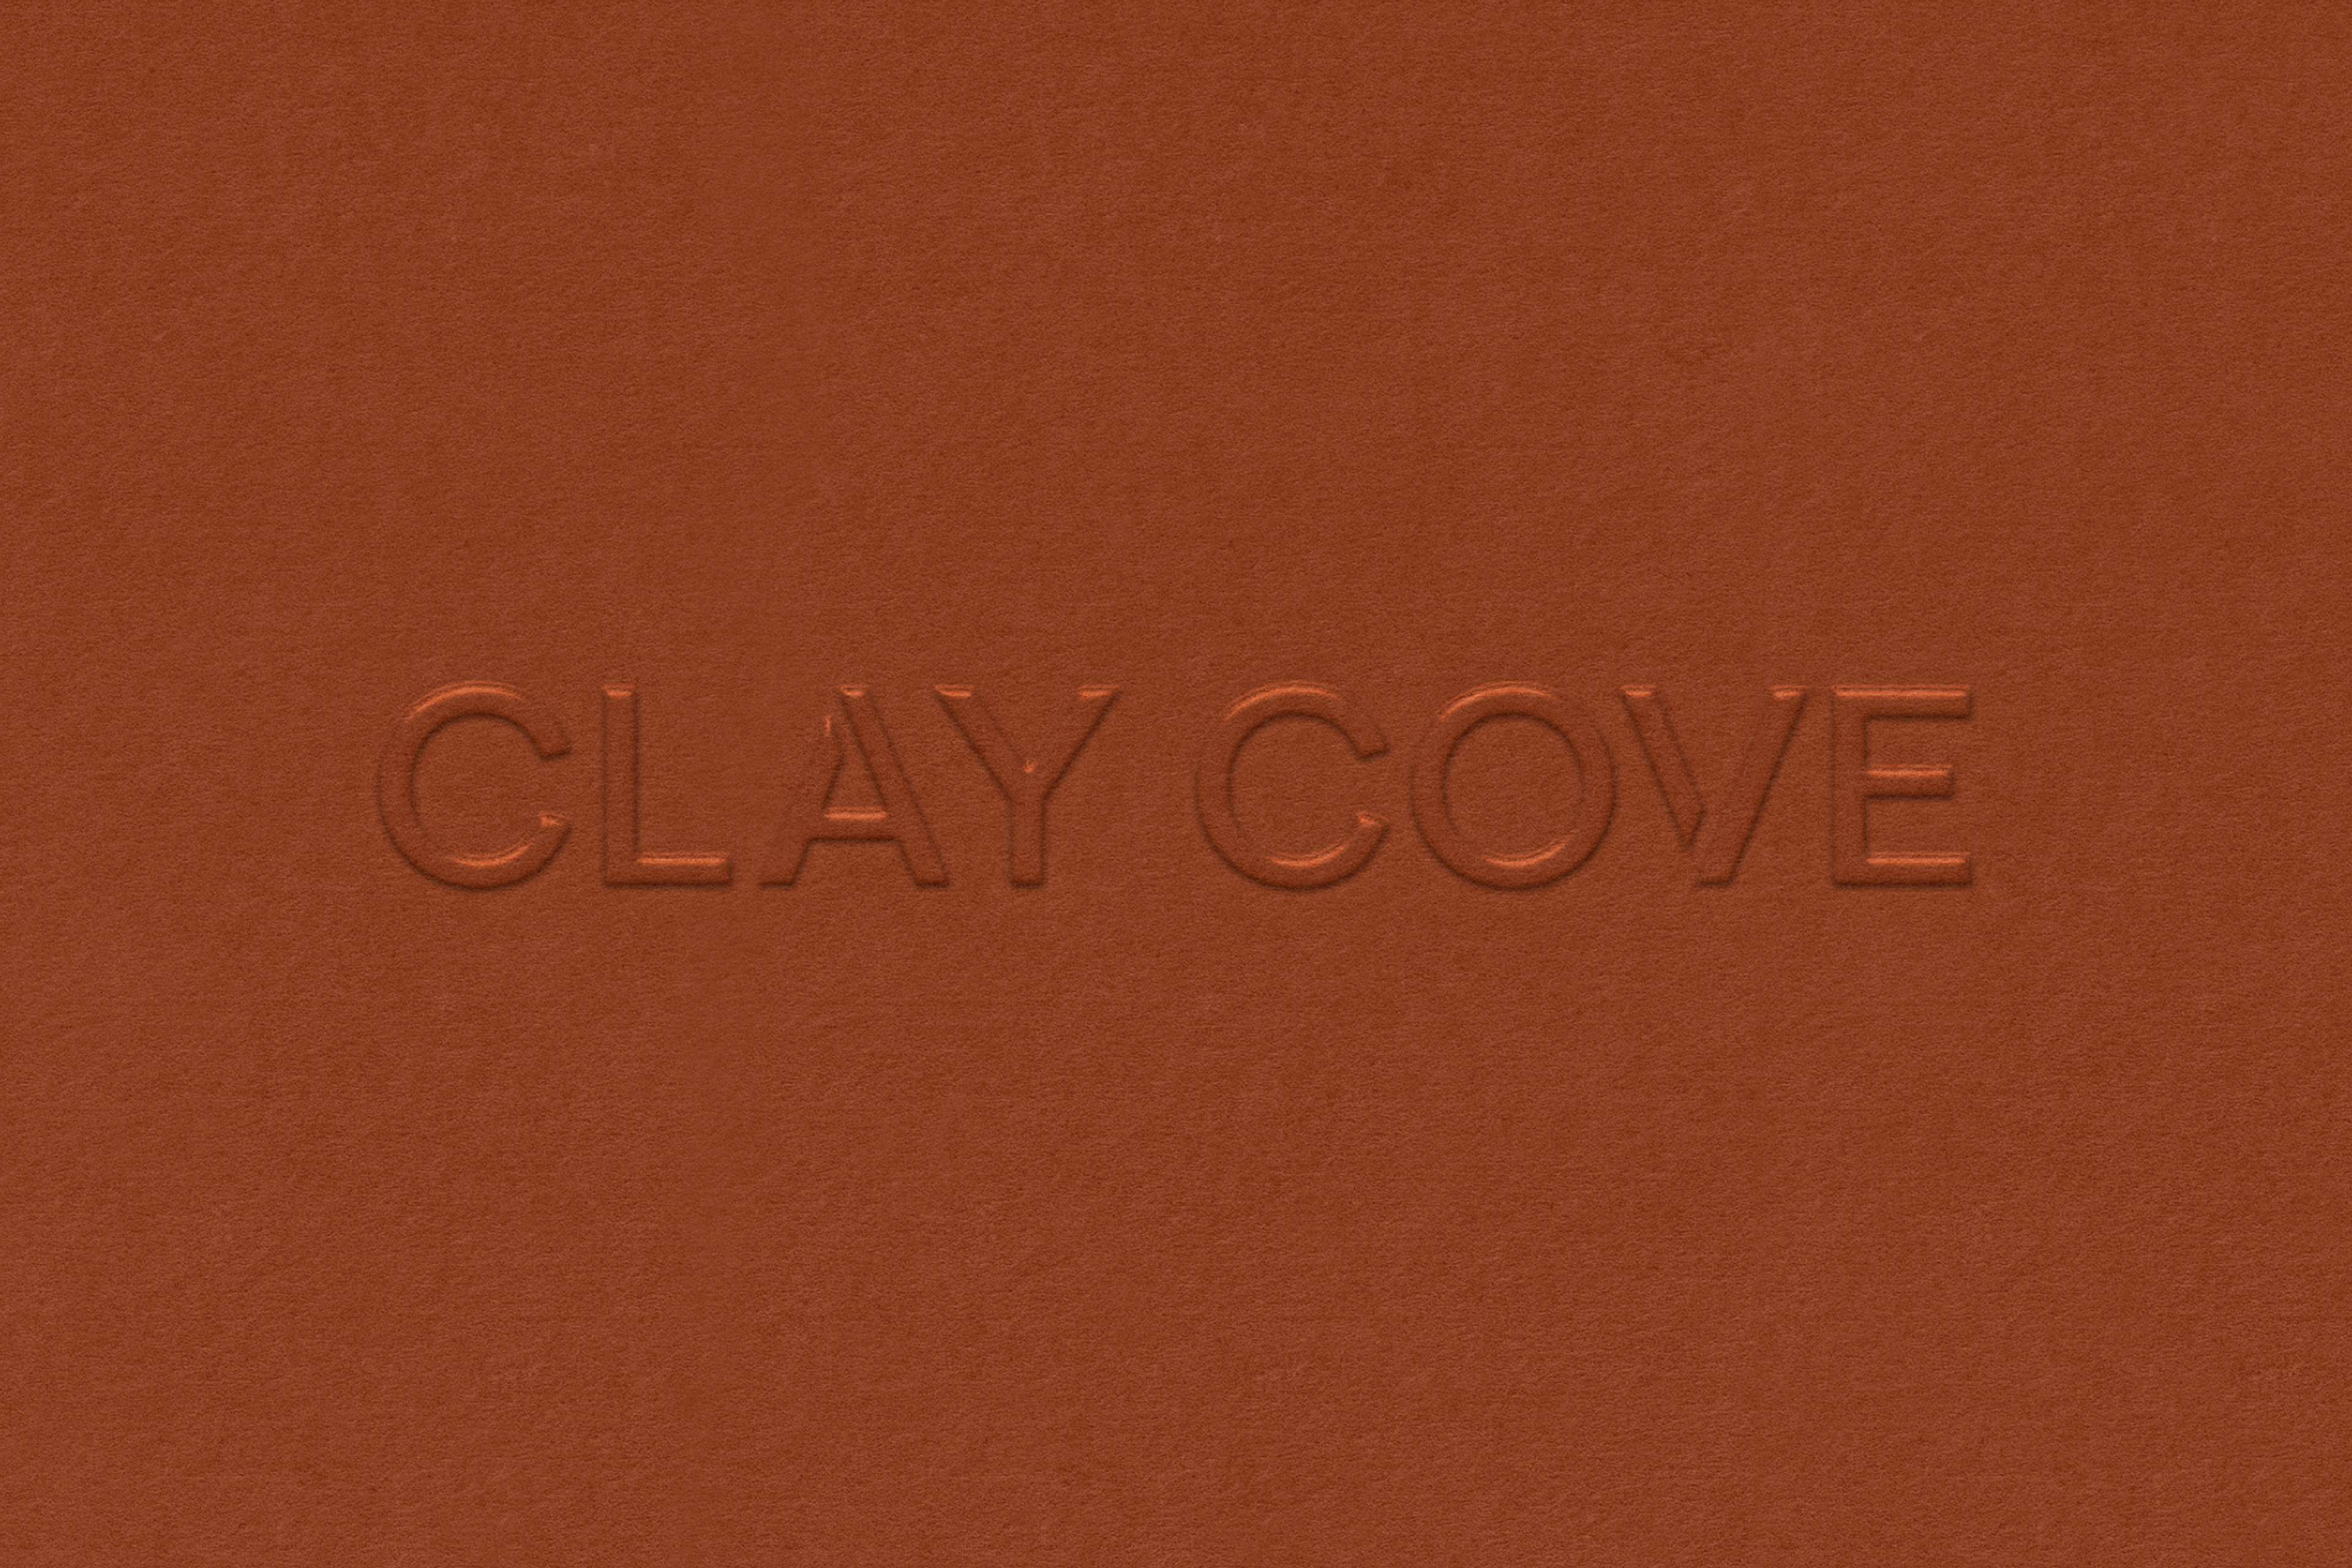 Clay Cove — Two Are